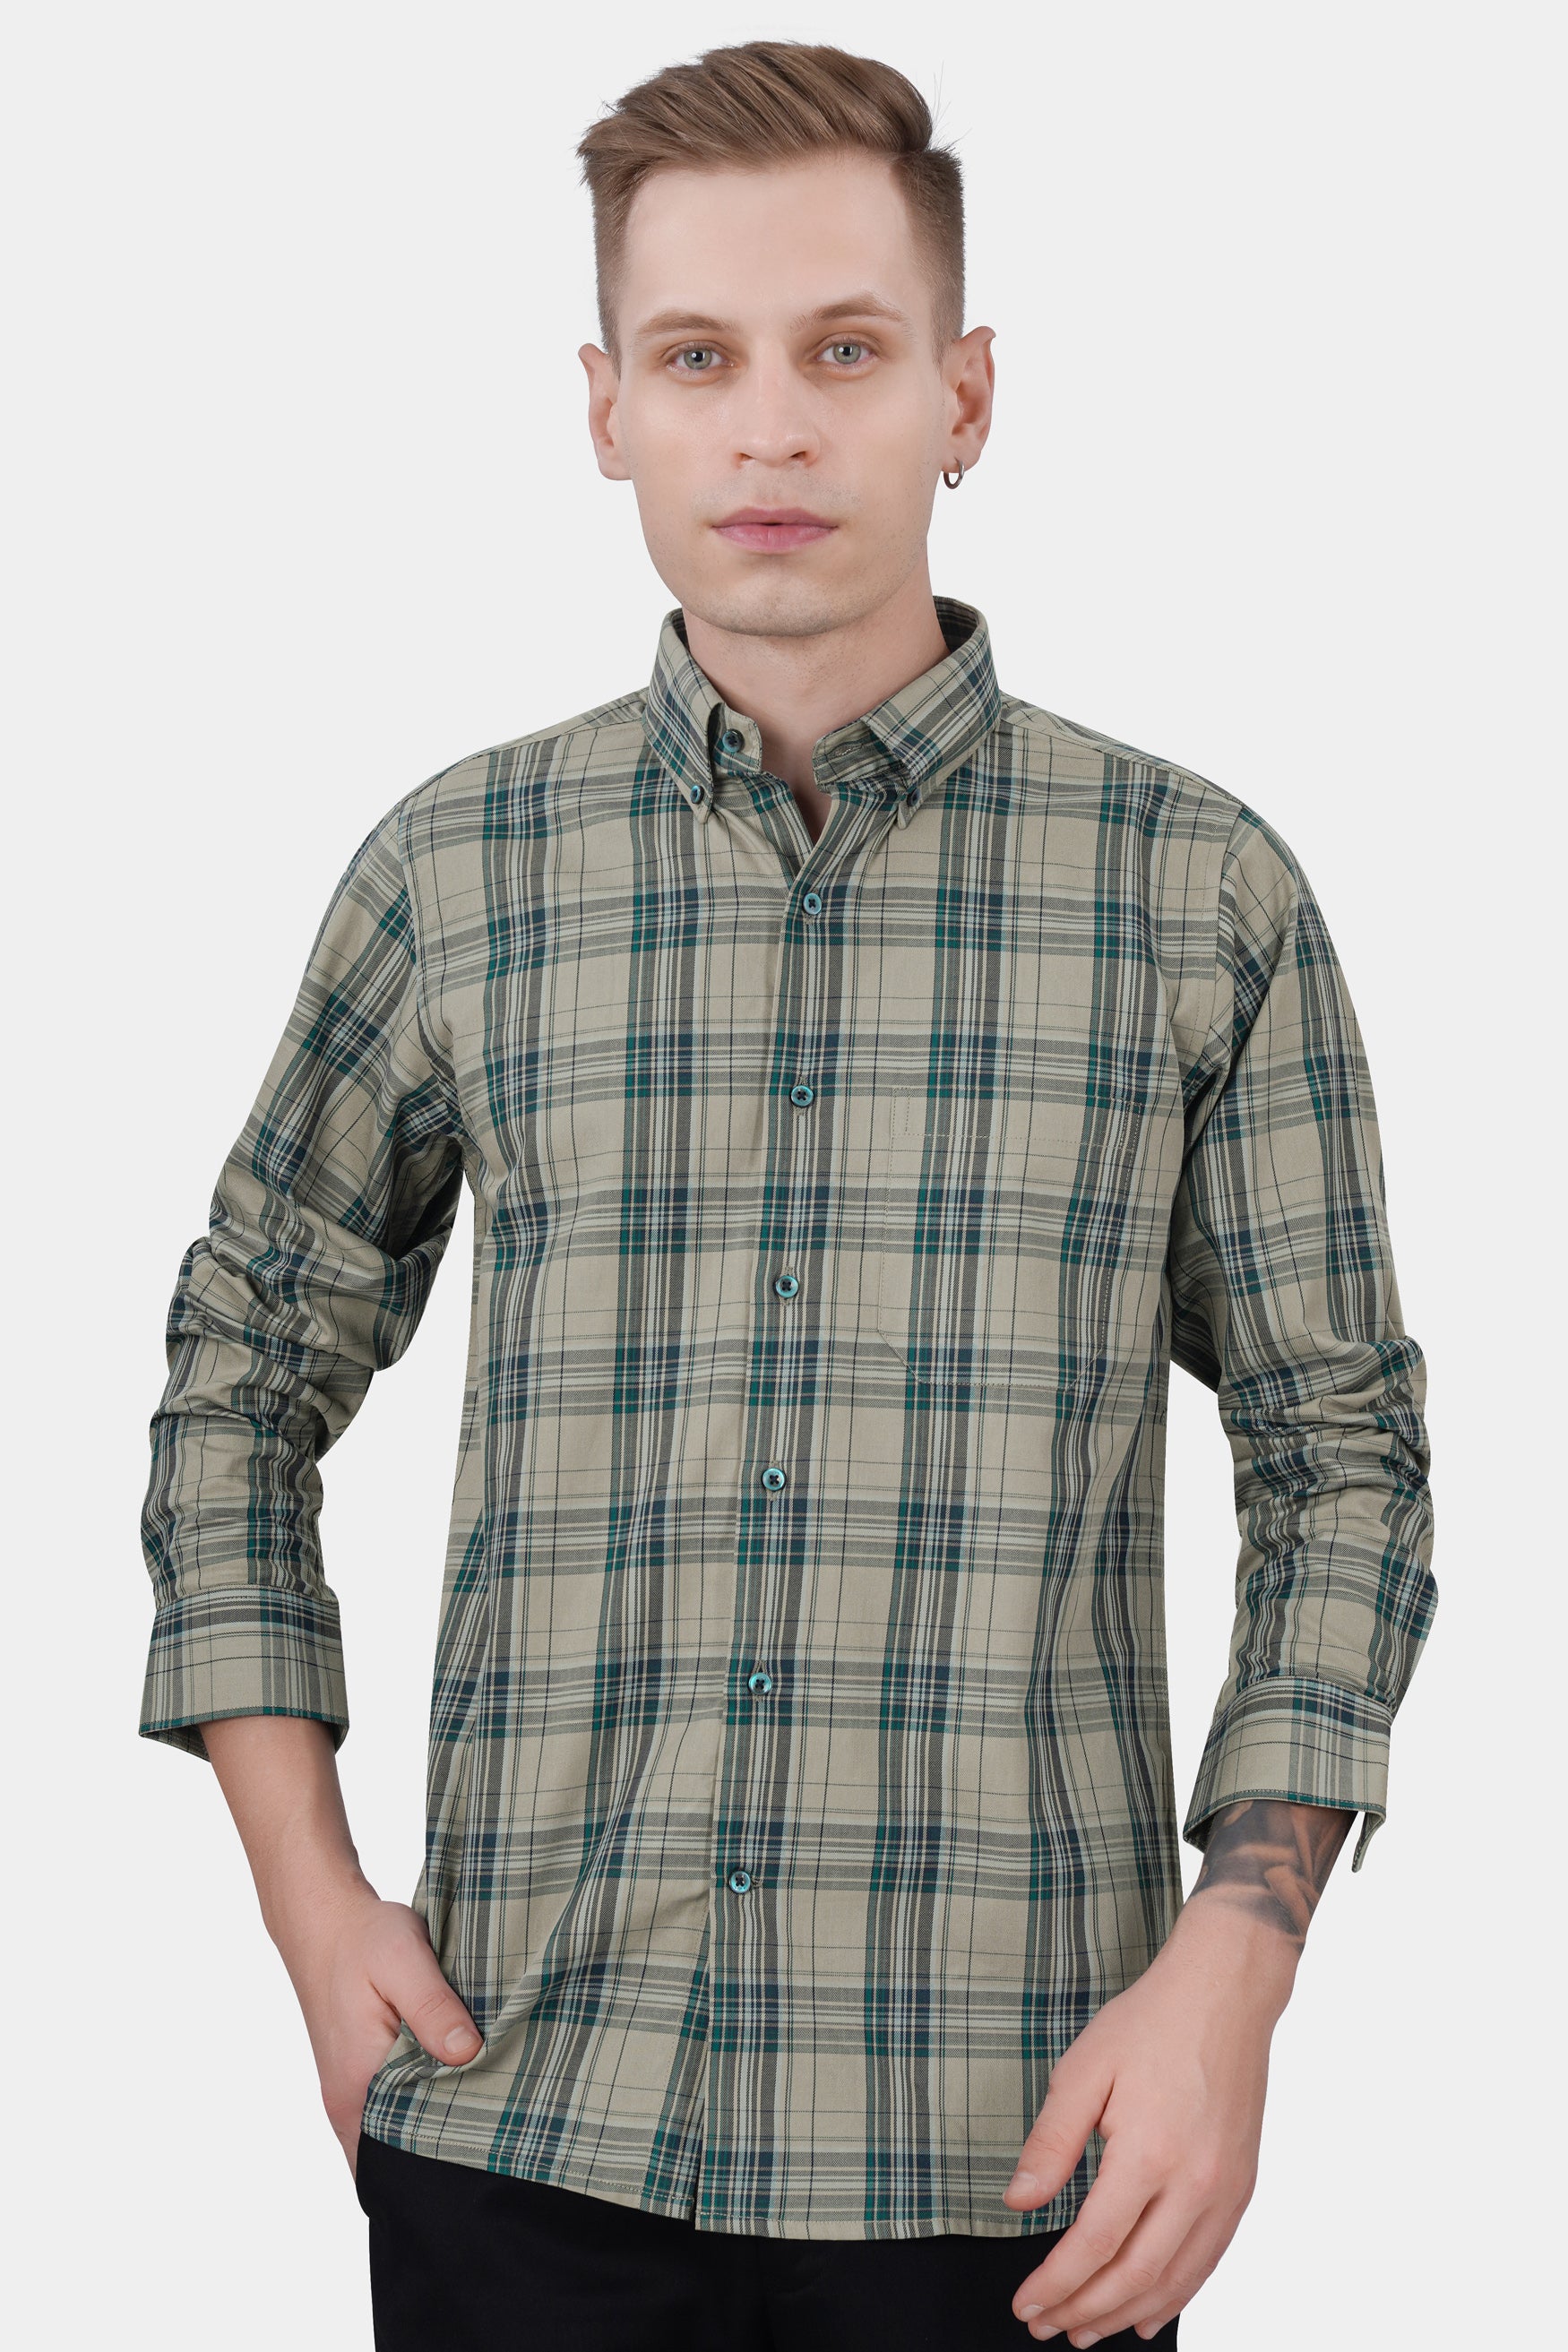 Sage Brown and Dianne Green Twill Plaid Premium Cotton Shirt 11755-BD-BLE-38, 11755-BD-BLE-H-38, 11755-BD-BLE-39, 11755-BD-BLE-H-39, 11755-BD-BLE-40, 11755-BD-BLE-H-40, 11755-BD-BLE-42, 11755-BD-BLE-H-42, 11755-BD-BLE-44, 11755-BD-BLE-H-44, 11755-BD-BLE-46, 11755-BD-BLE-H-46, 11755-BD-BLE-48, 11755-BD-BLE-H-48, 11755-BD-BLE-50, 11755-BD-BLE-H-50, 11755-BD-BLE-52, 11755-BD-BLE-H-52